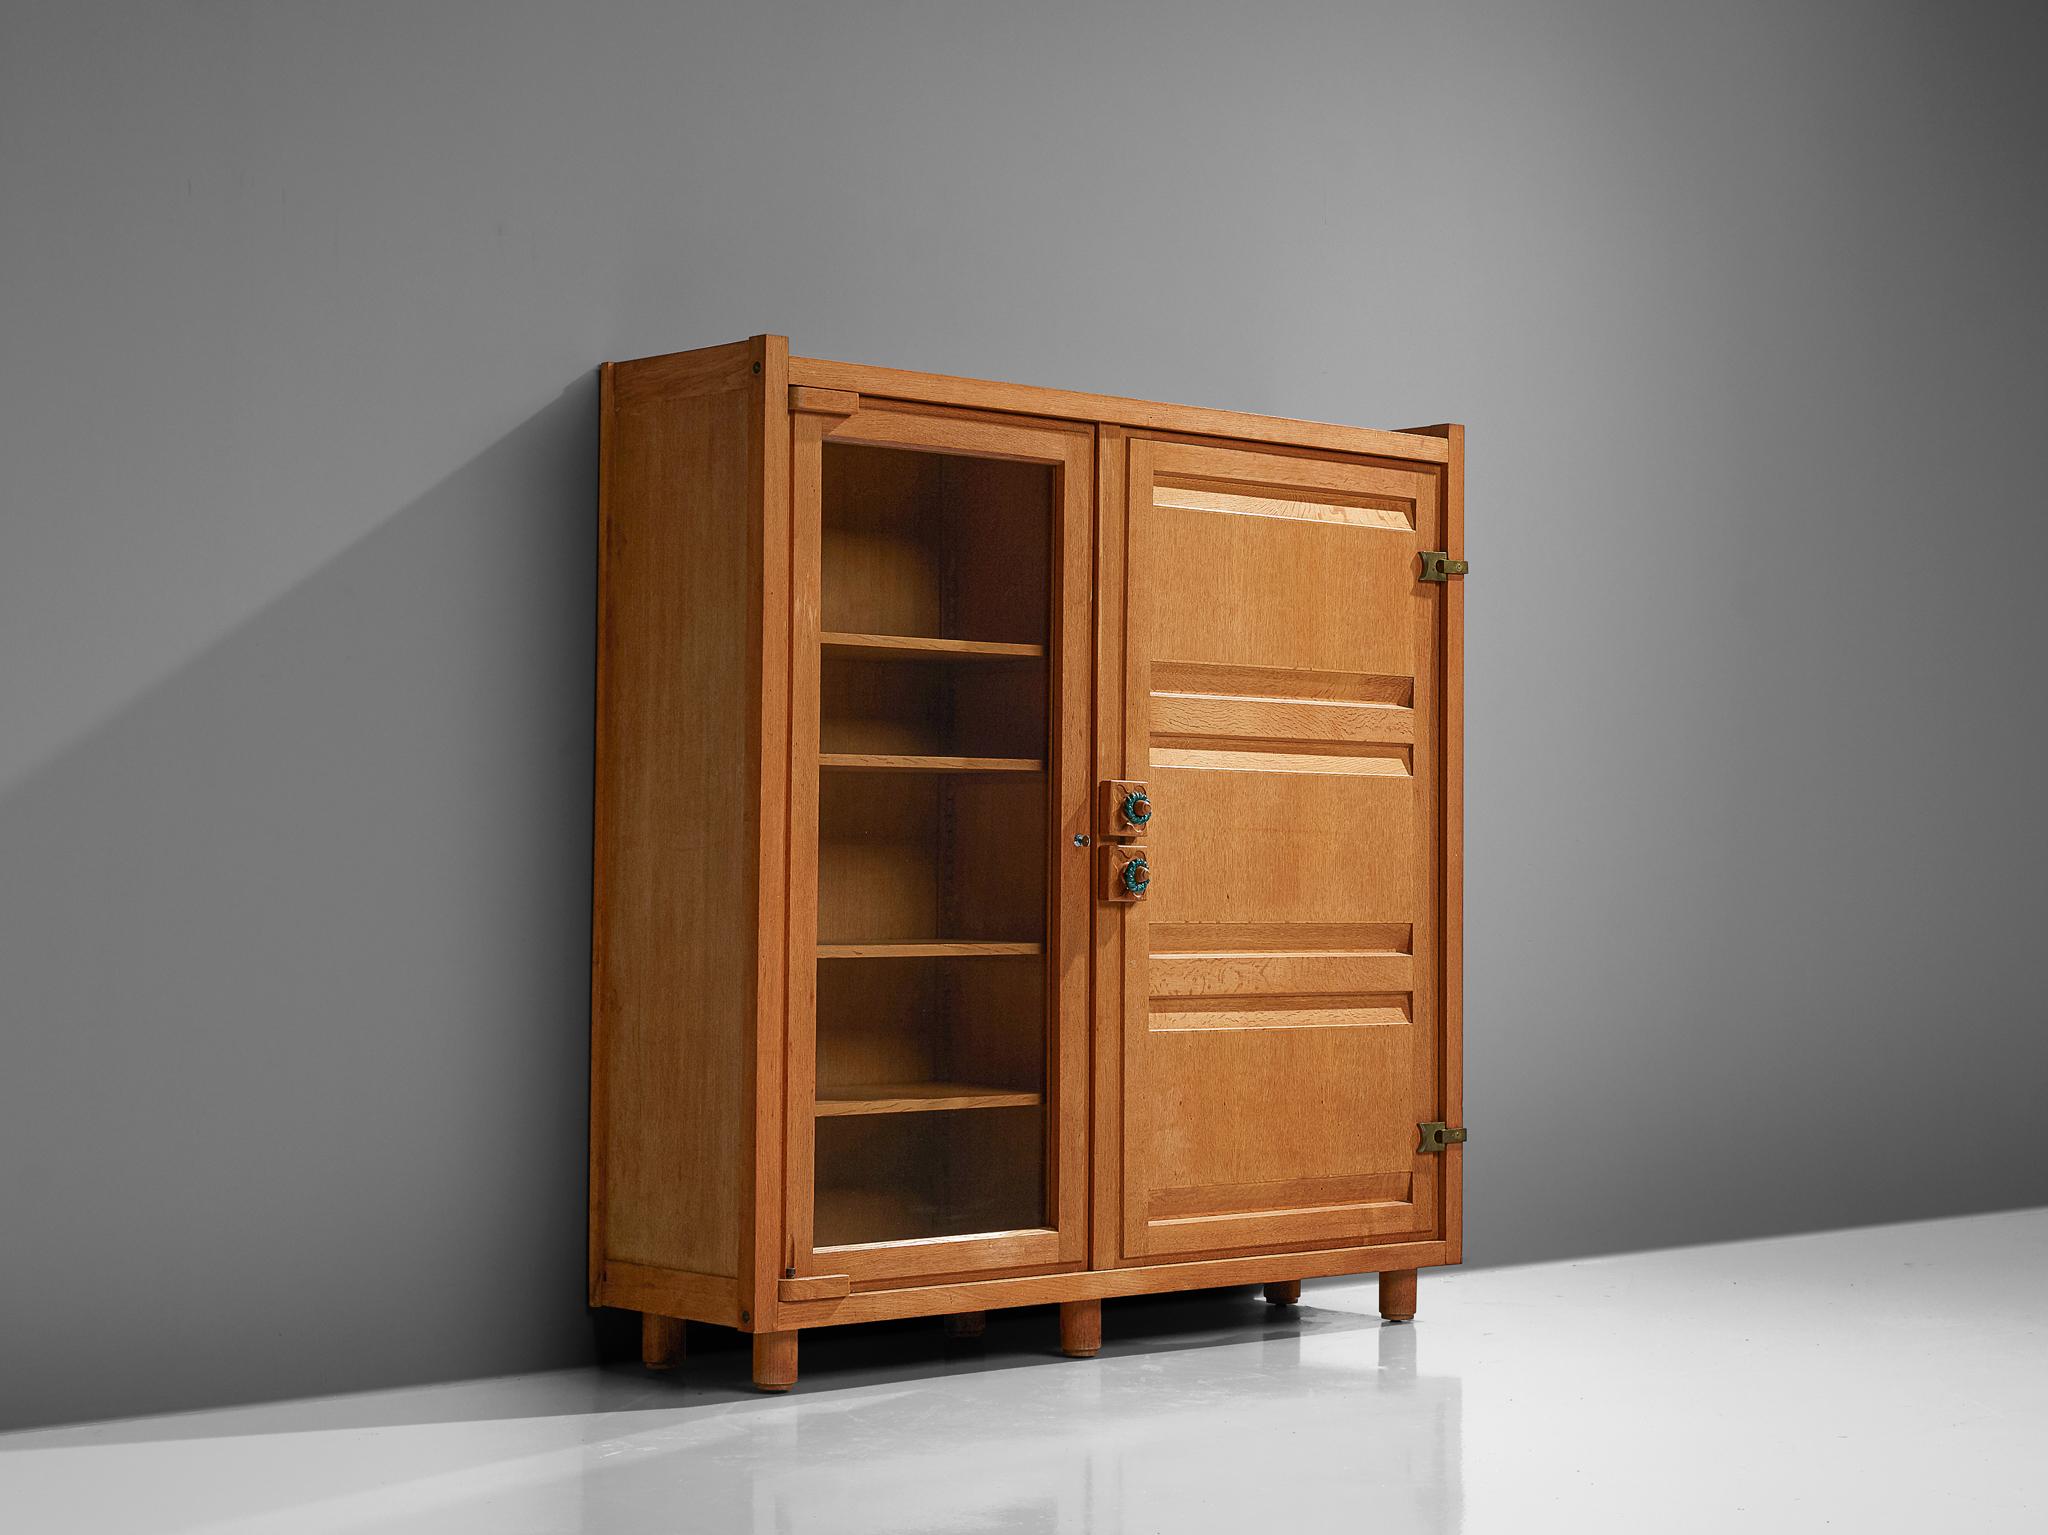 Guillerme et Chambron, armoire, oak, ceramics and glass, France, 1960s.

This case piece is designed by Guillerme and Chambron and features geometric oak inlays, which is characteristic for the French duo. The glass door makes this vitrine perfect